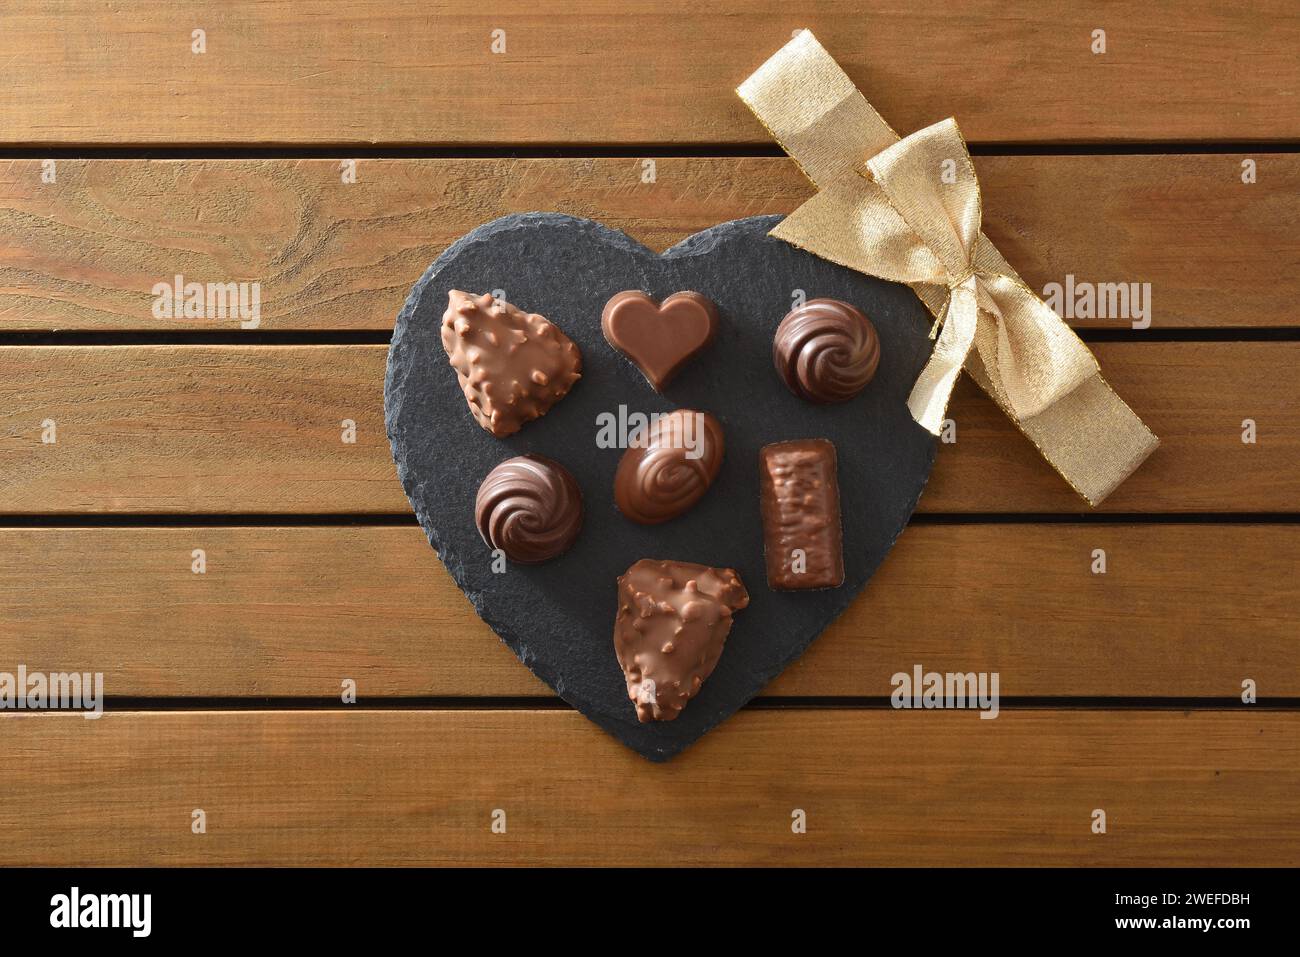 Assortment of chocolates on heart-shaped slate plate with golden bow in the center on wooden slatted table. Top view. Stock Photo